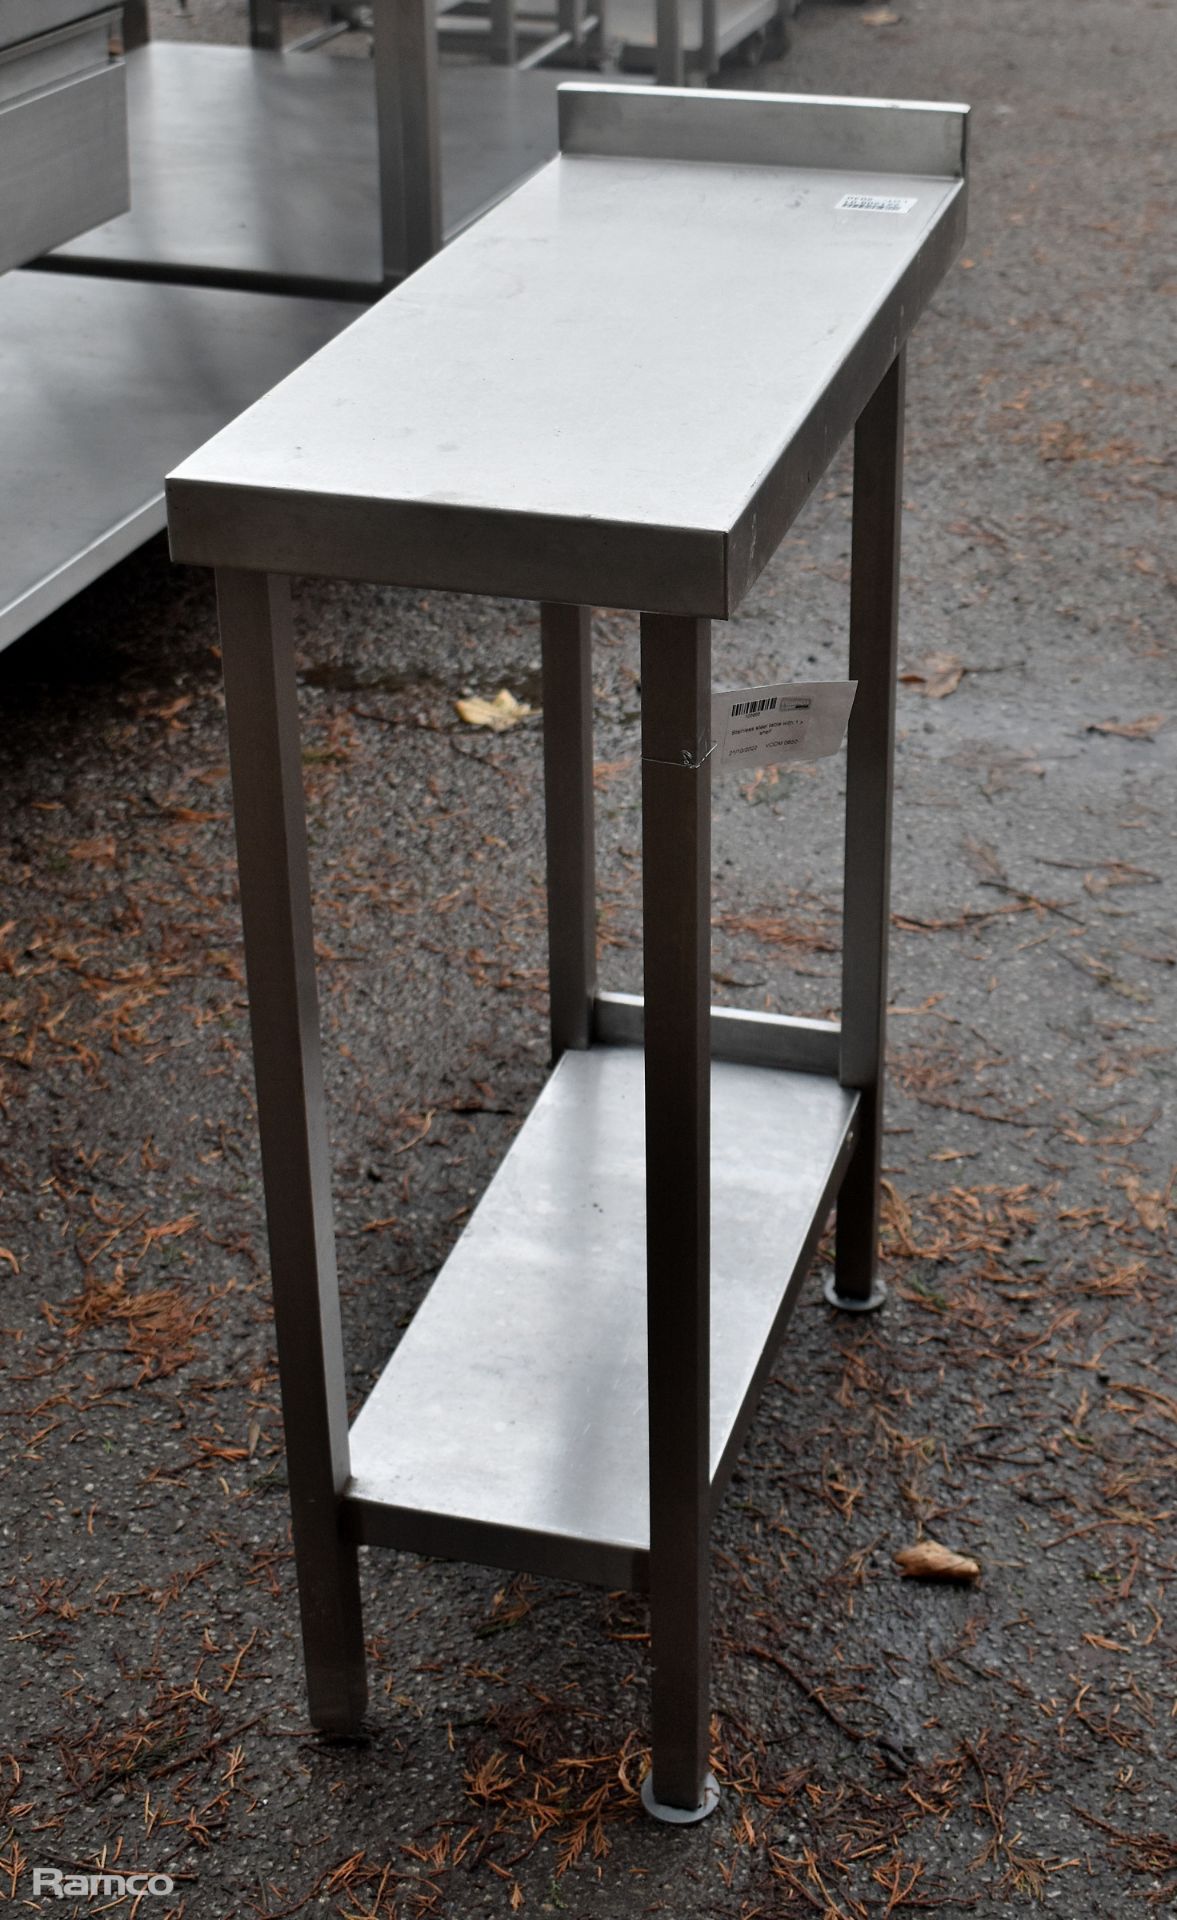 Stainless steel table with 1 x shelf